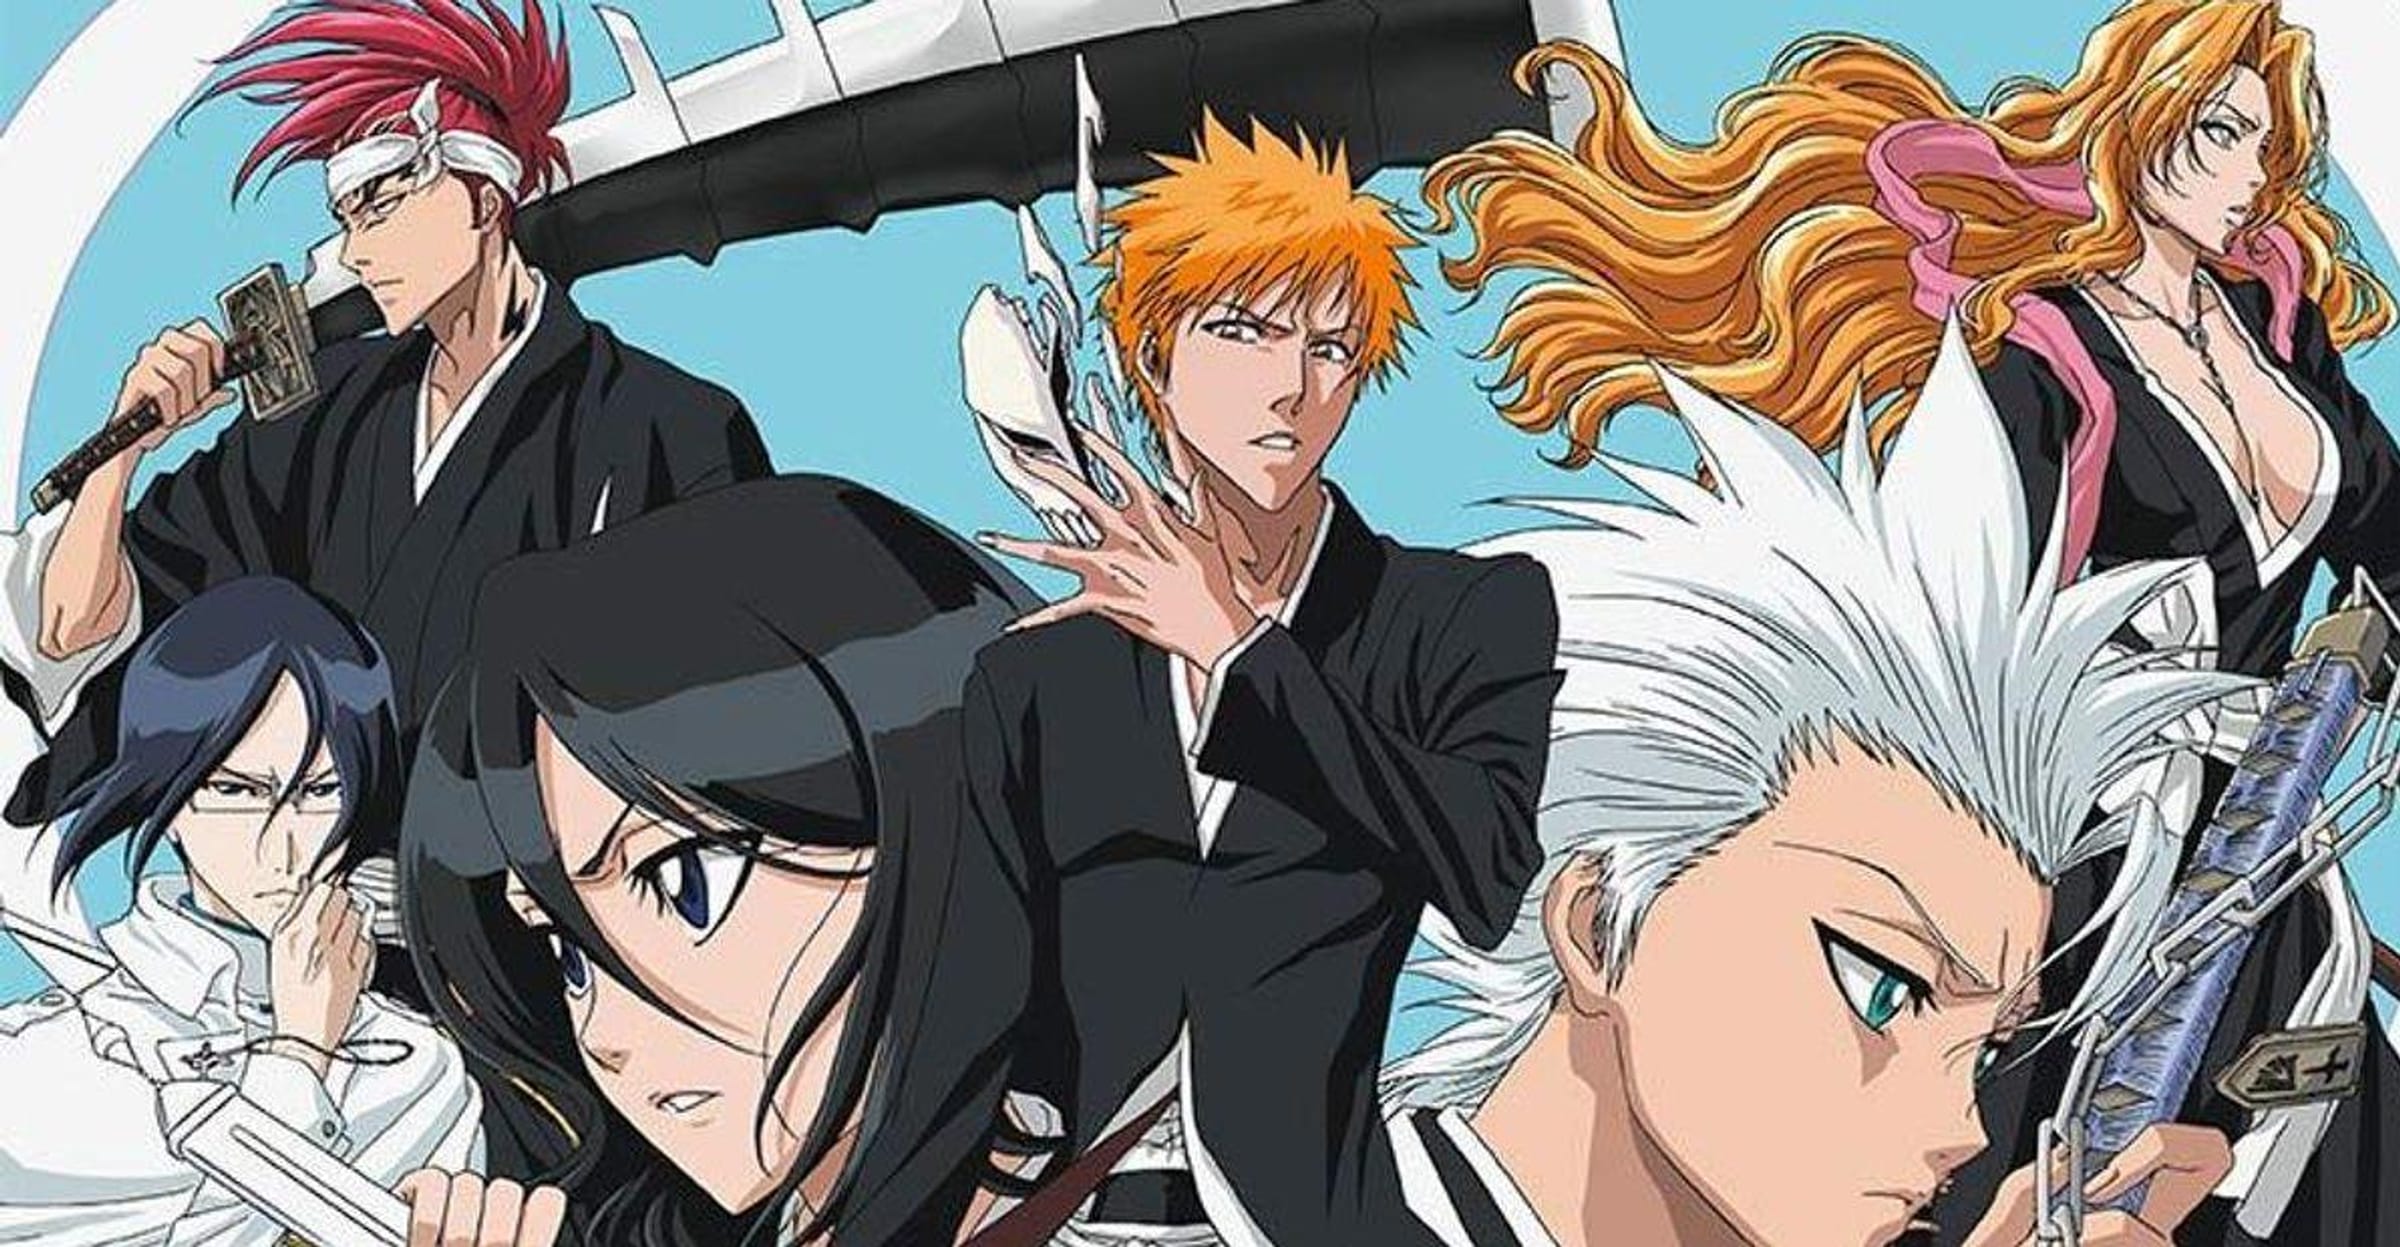 Bleach - Popular Anime and manga Series - Episodes, Characters